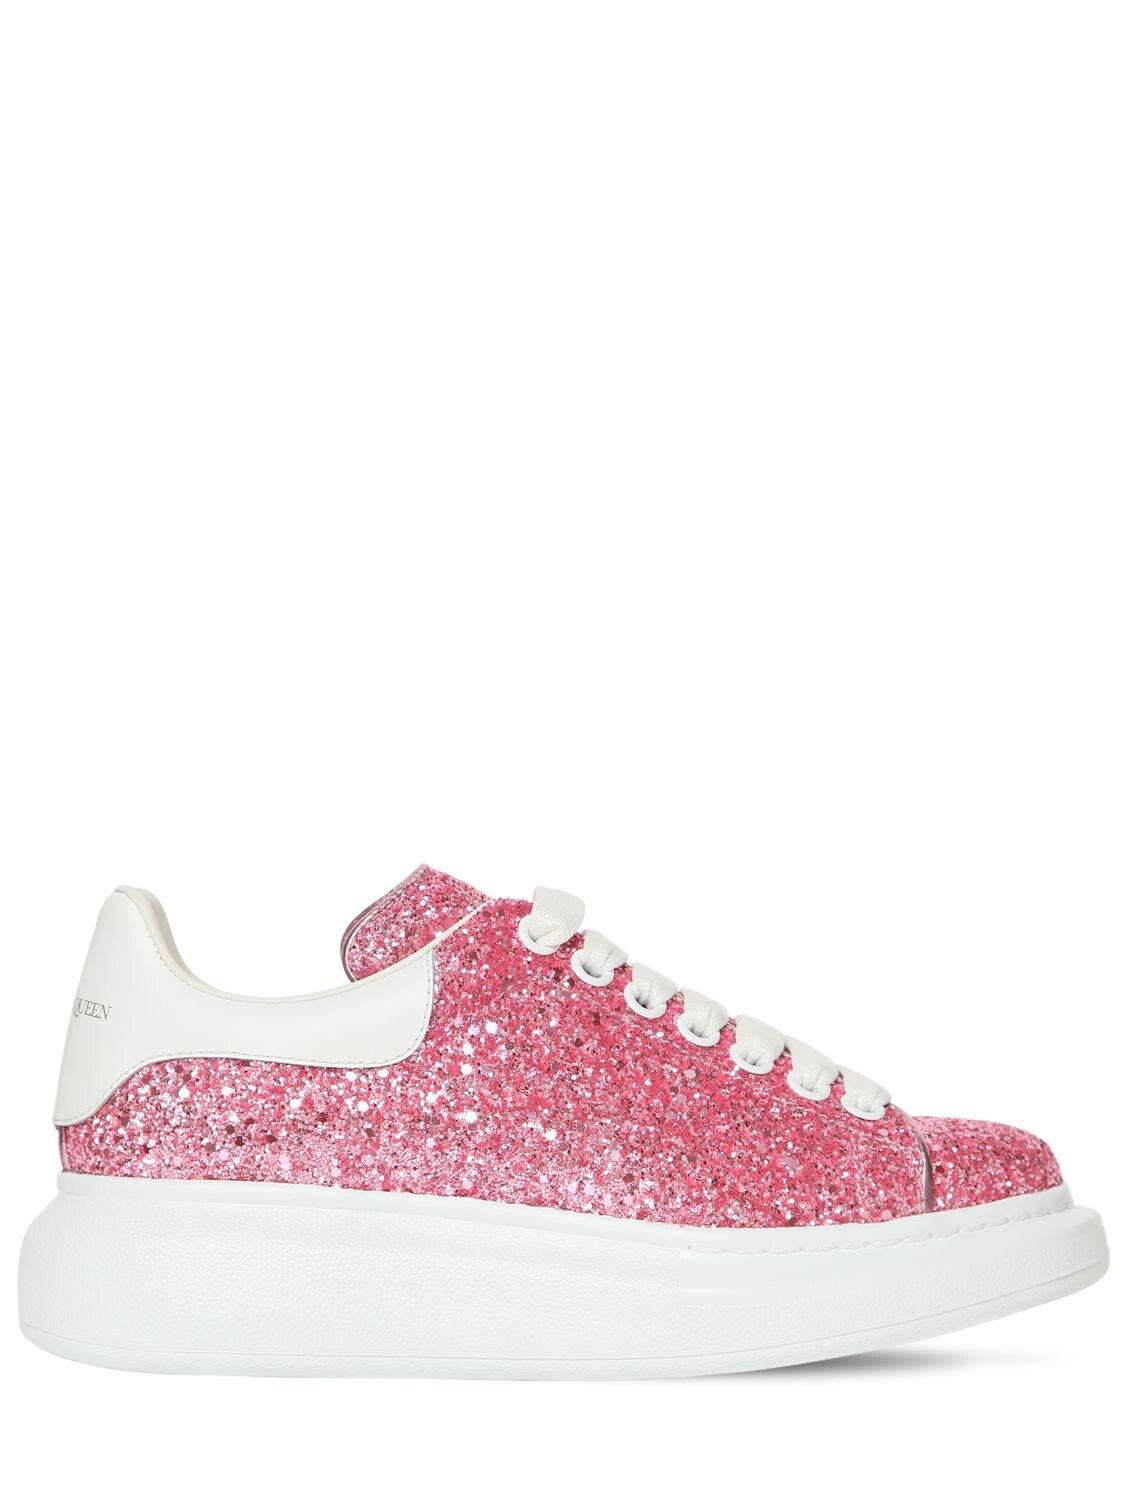 Alexander McQueen 45mm Glittered Leather Sneakers in Pink - Lyst